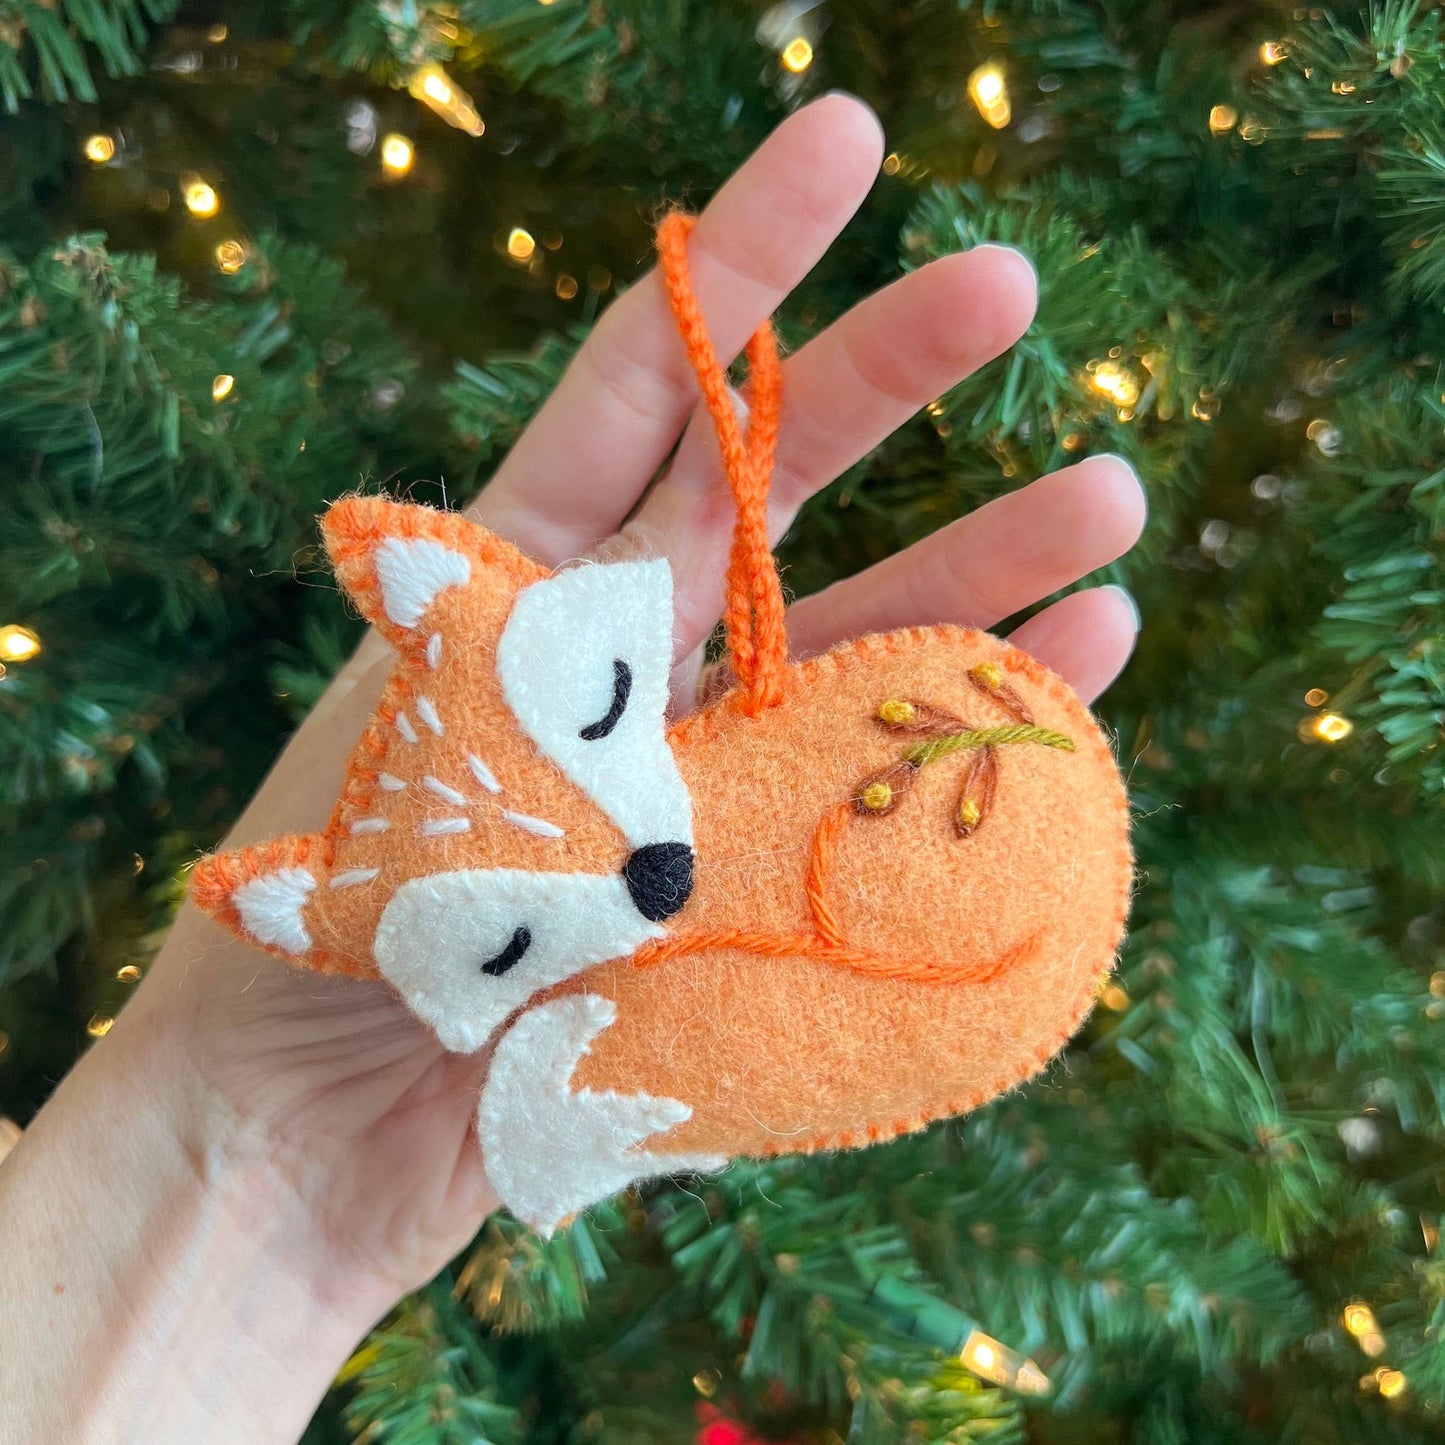 Sleeping Fox Embroidered Wool Ornament from Ornaments 4 Orphans